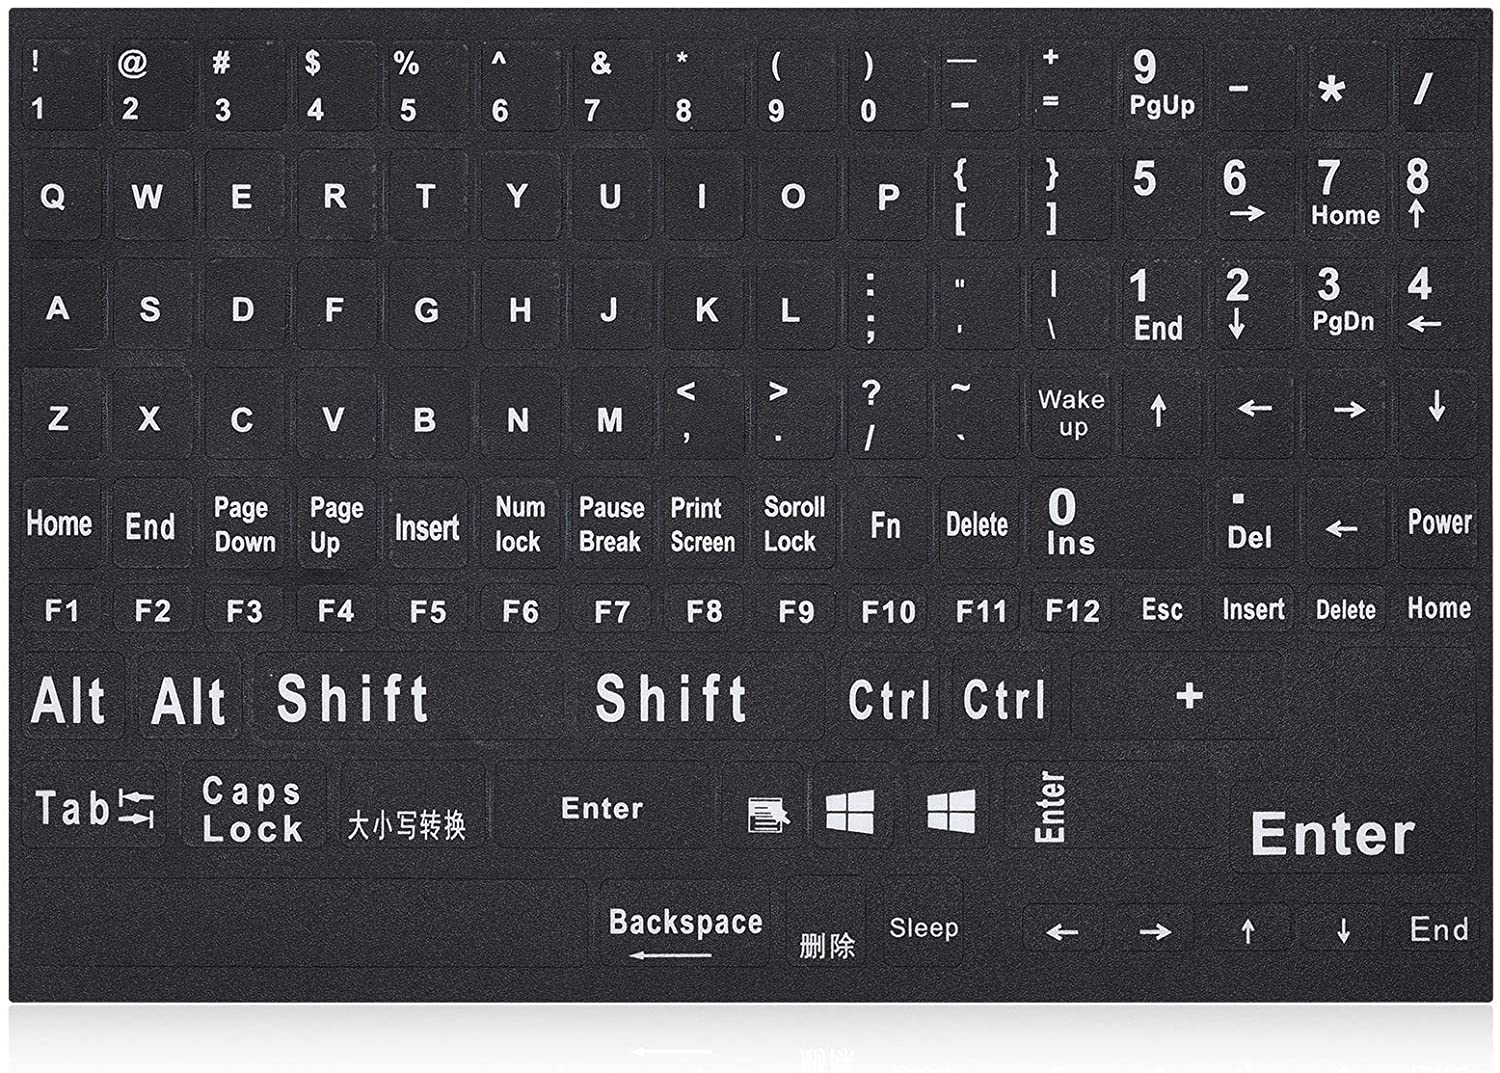 Universal English Keyboard Stickers For PC Computer Laptop Desktop Notebook Keyboards, Replacement Keyboard Stickers Black Background With White Large Lettering-English